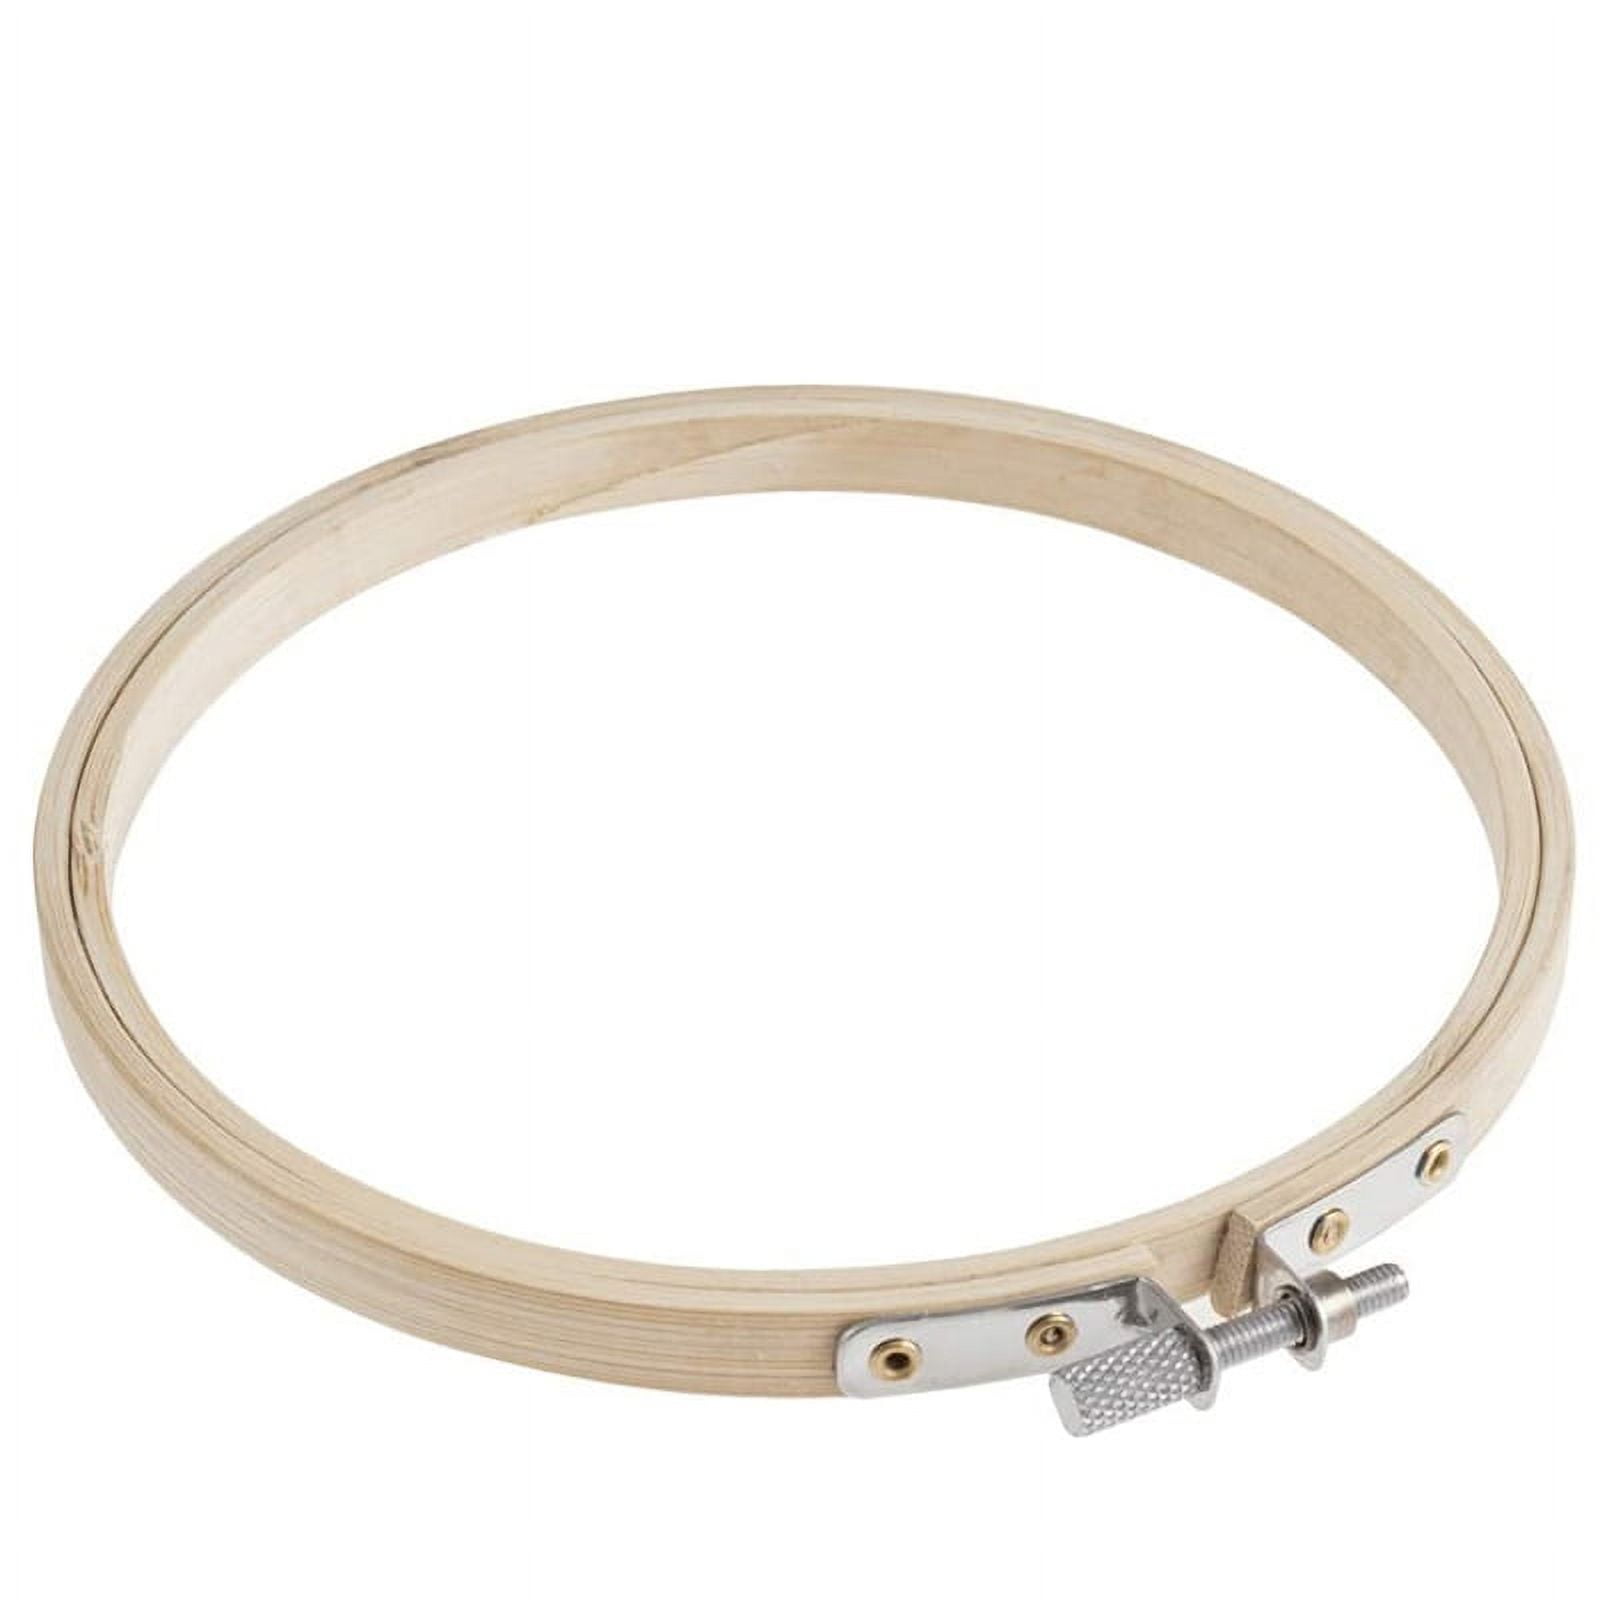 Bastex 15 Piece Gold Metal Hoop Craft Rings. Bulk Ring Sizes That Include, 2, 3, 4, 5 and 6 inch Diameter and. Perfect for